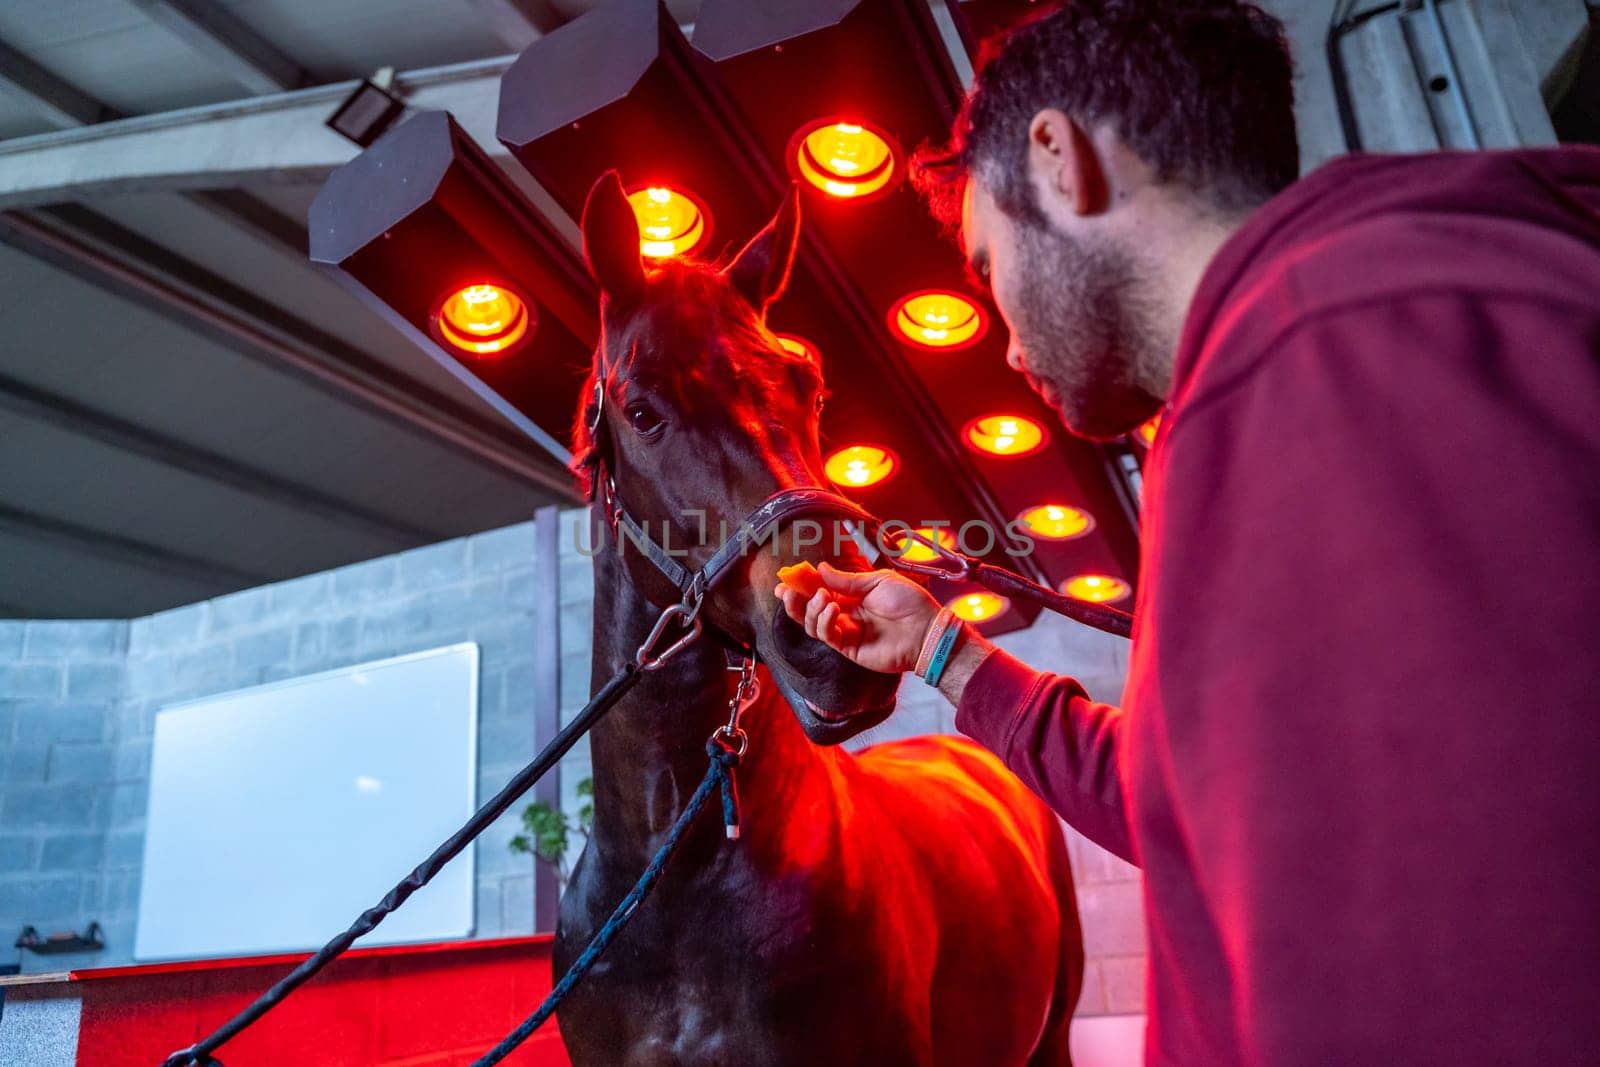 Horse drying under the lights of an equestrian solarium and a man petting it